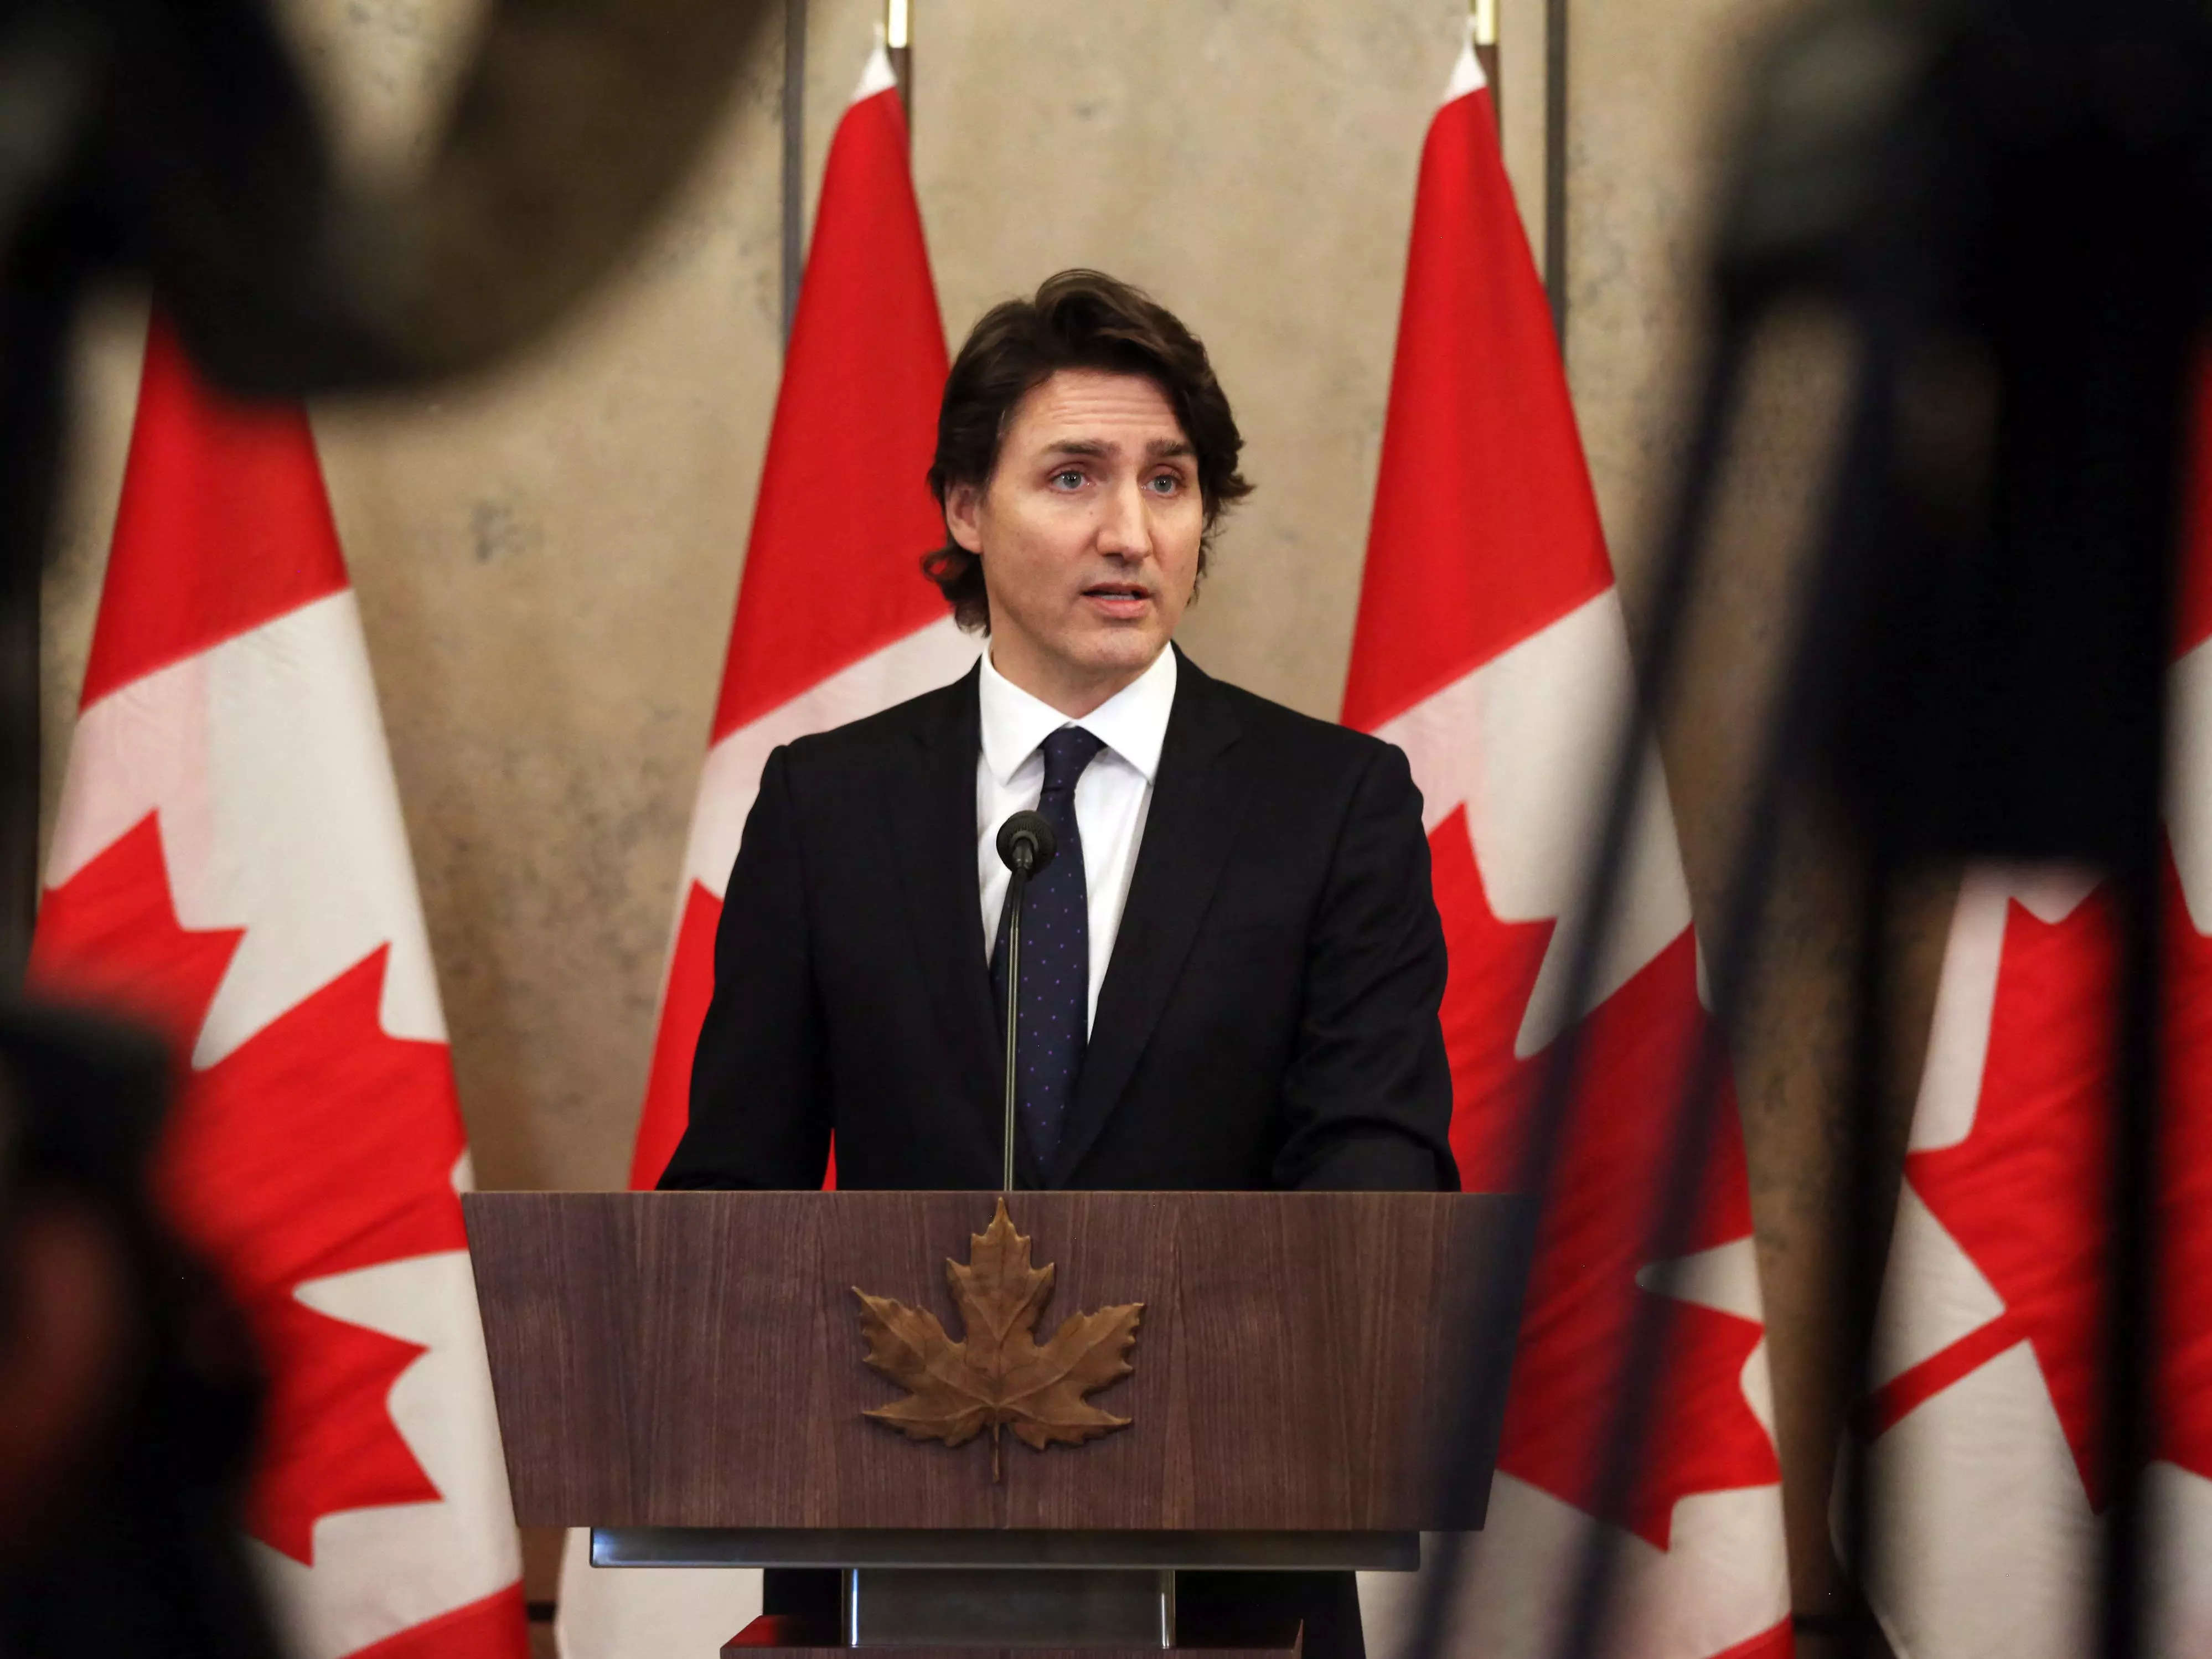 Prime Minister Justin Trudeau Says Canada Will Crack Down On Gun Ownership Limiting Handguns